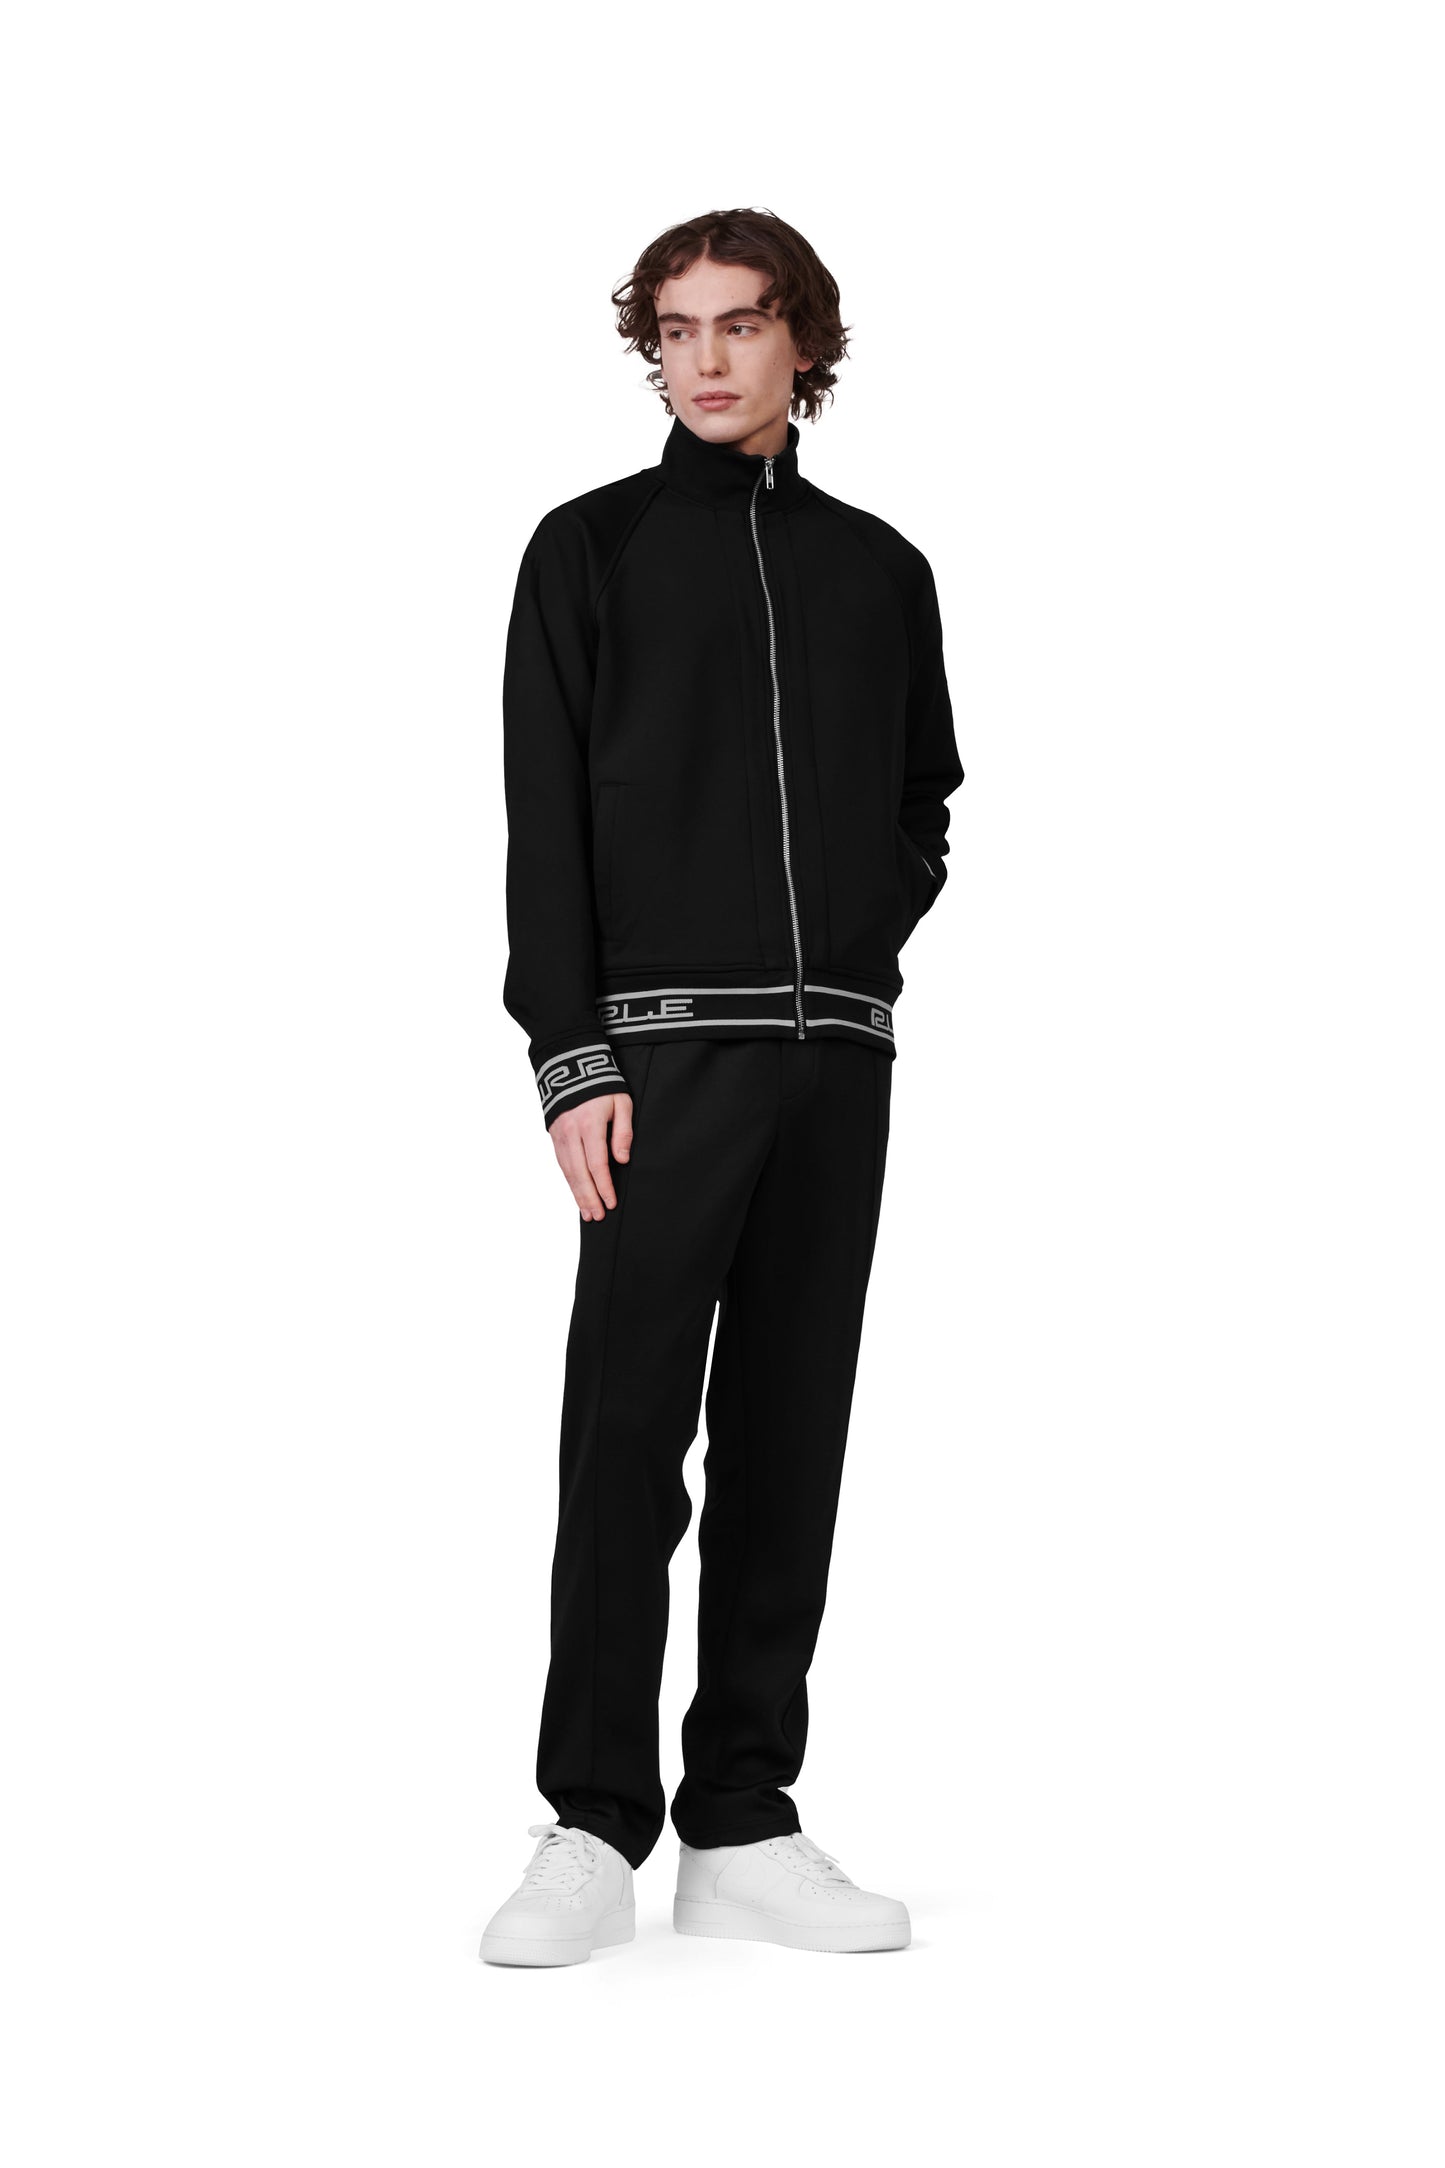 P415 TRACK PANT - Solid Poly Tricot Black Track Pant